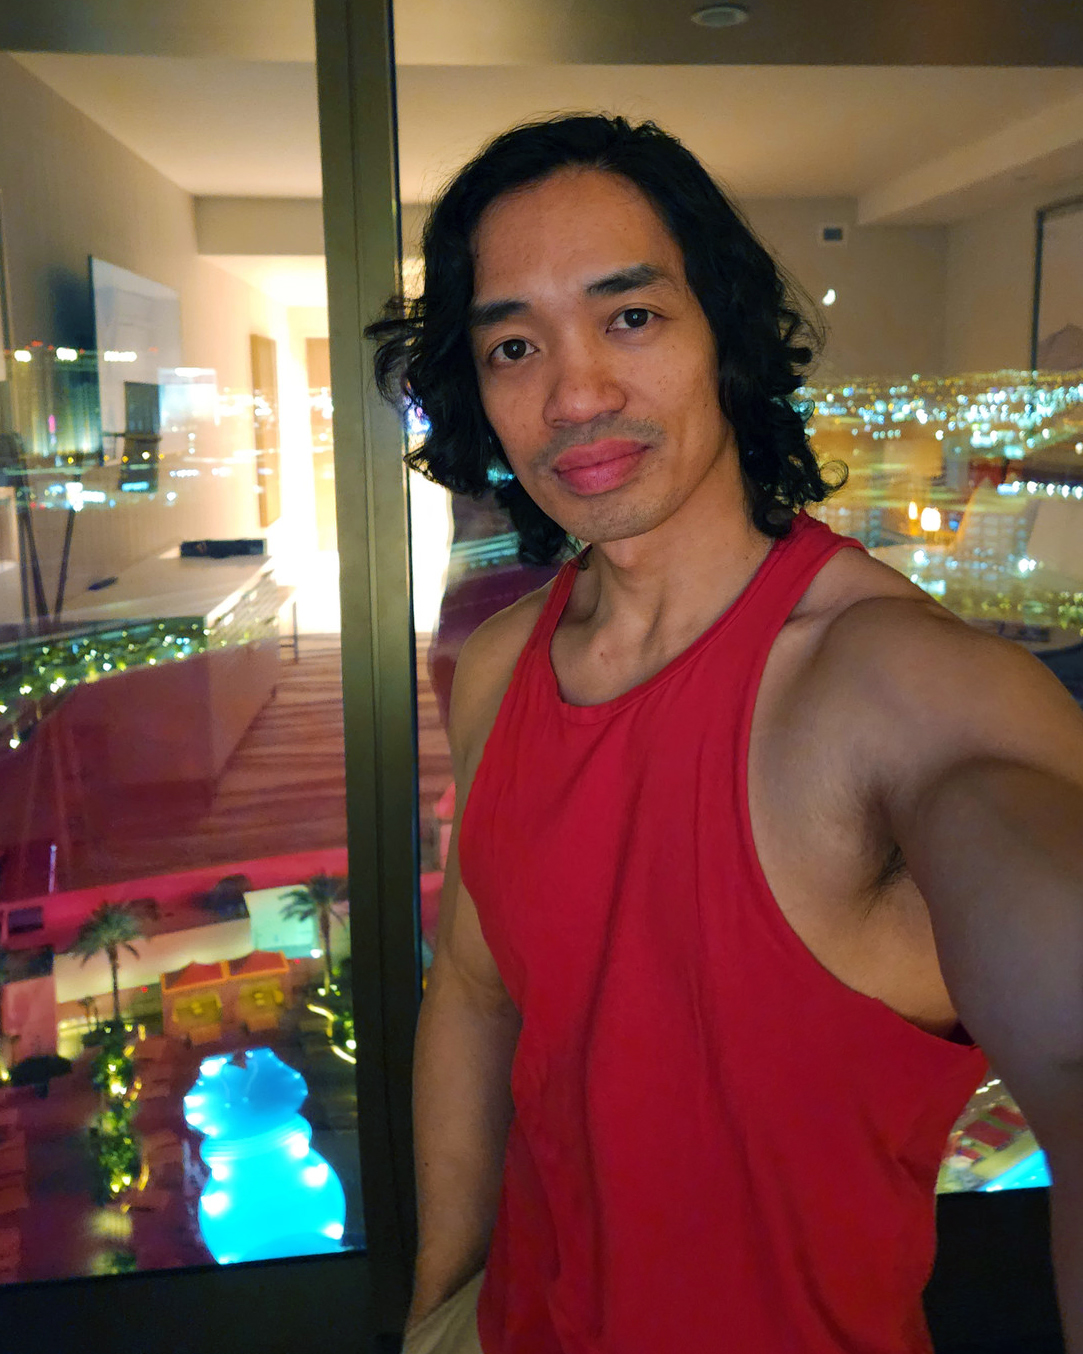 Jax Solomon Tantra Massage Las Vegas Overlooking The View from a Conrad Hotel Room with a Tantra Client